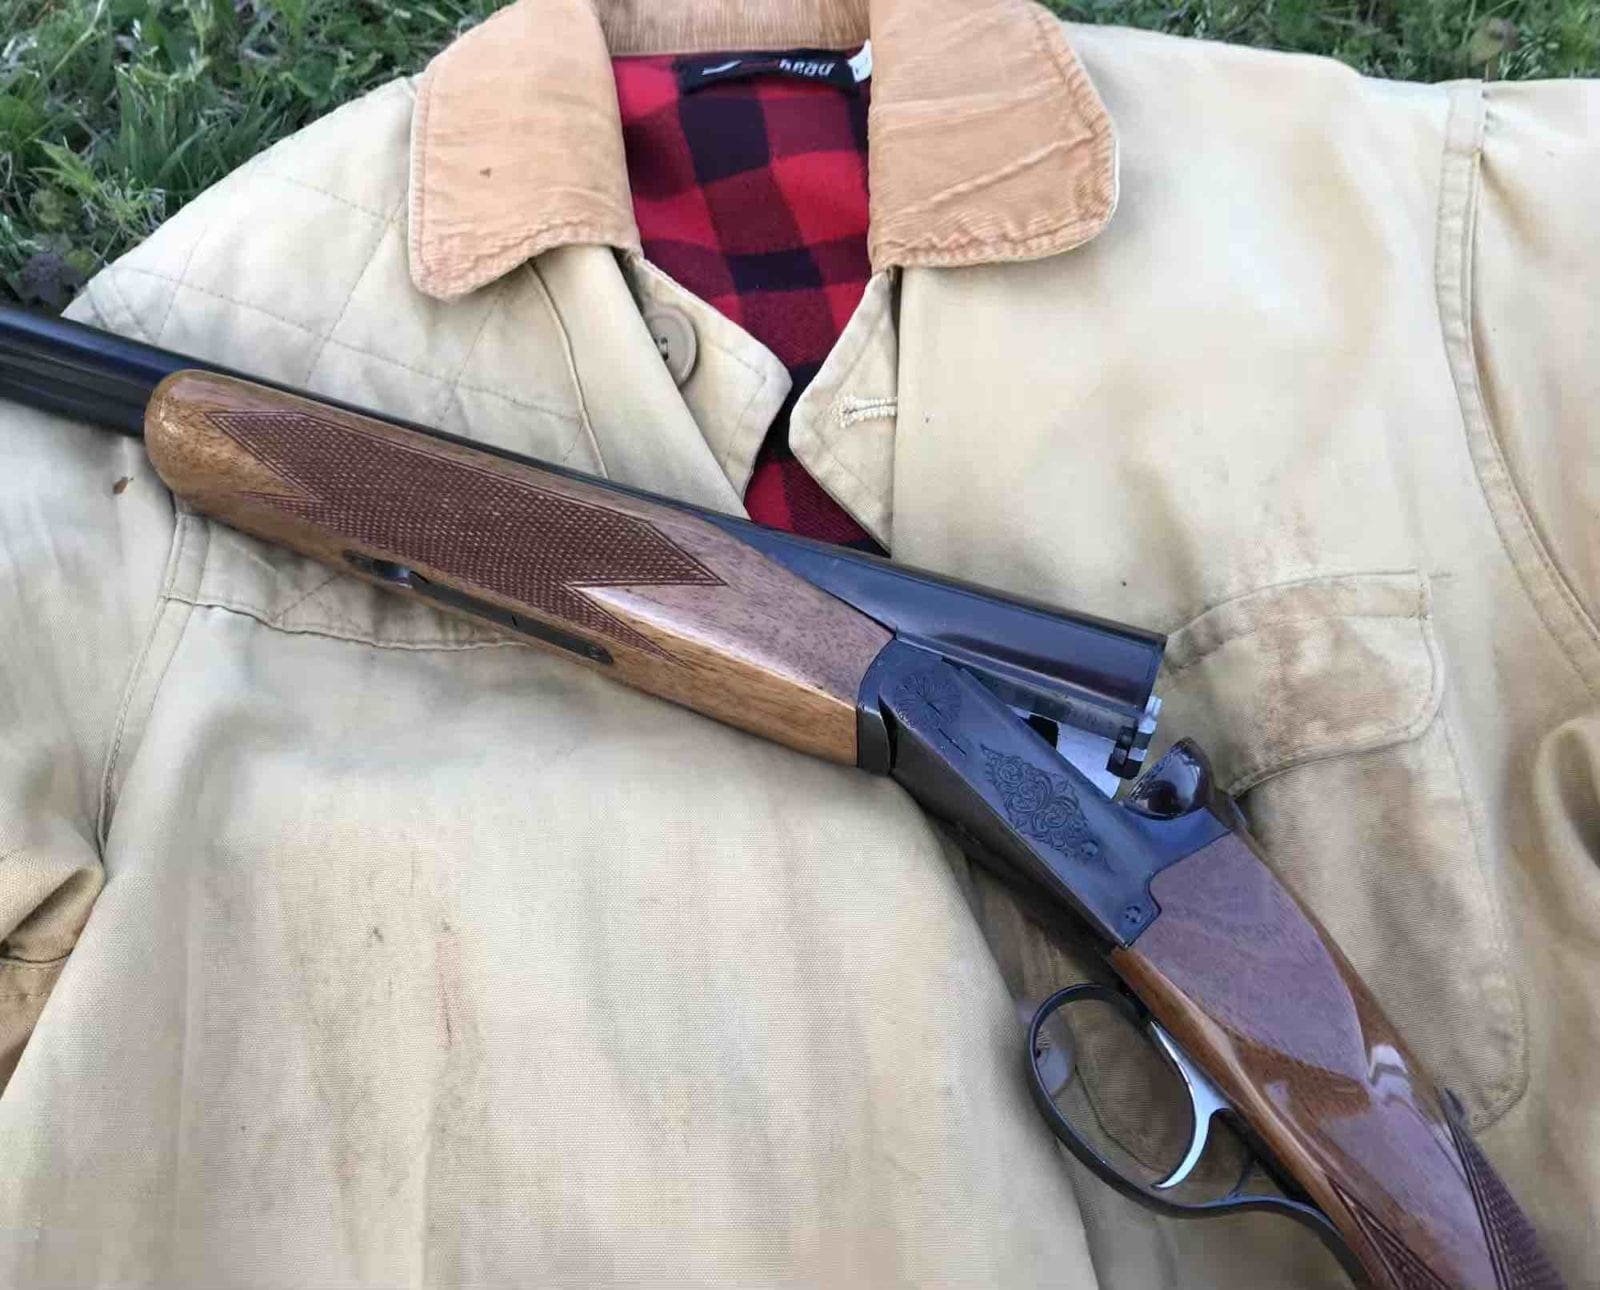 A Browning BSS shotgun laid out on a hunting jacket.